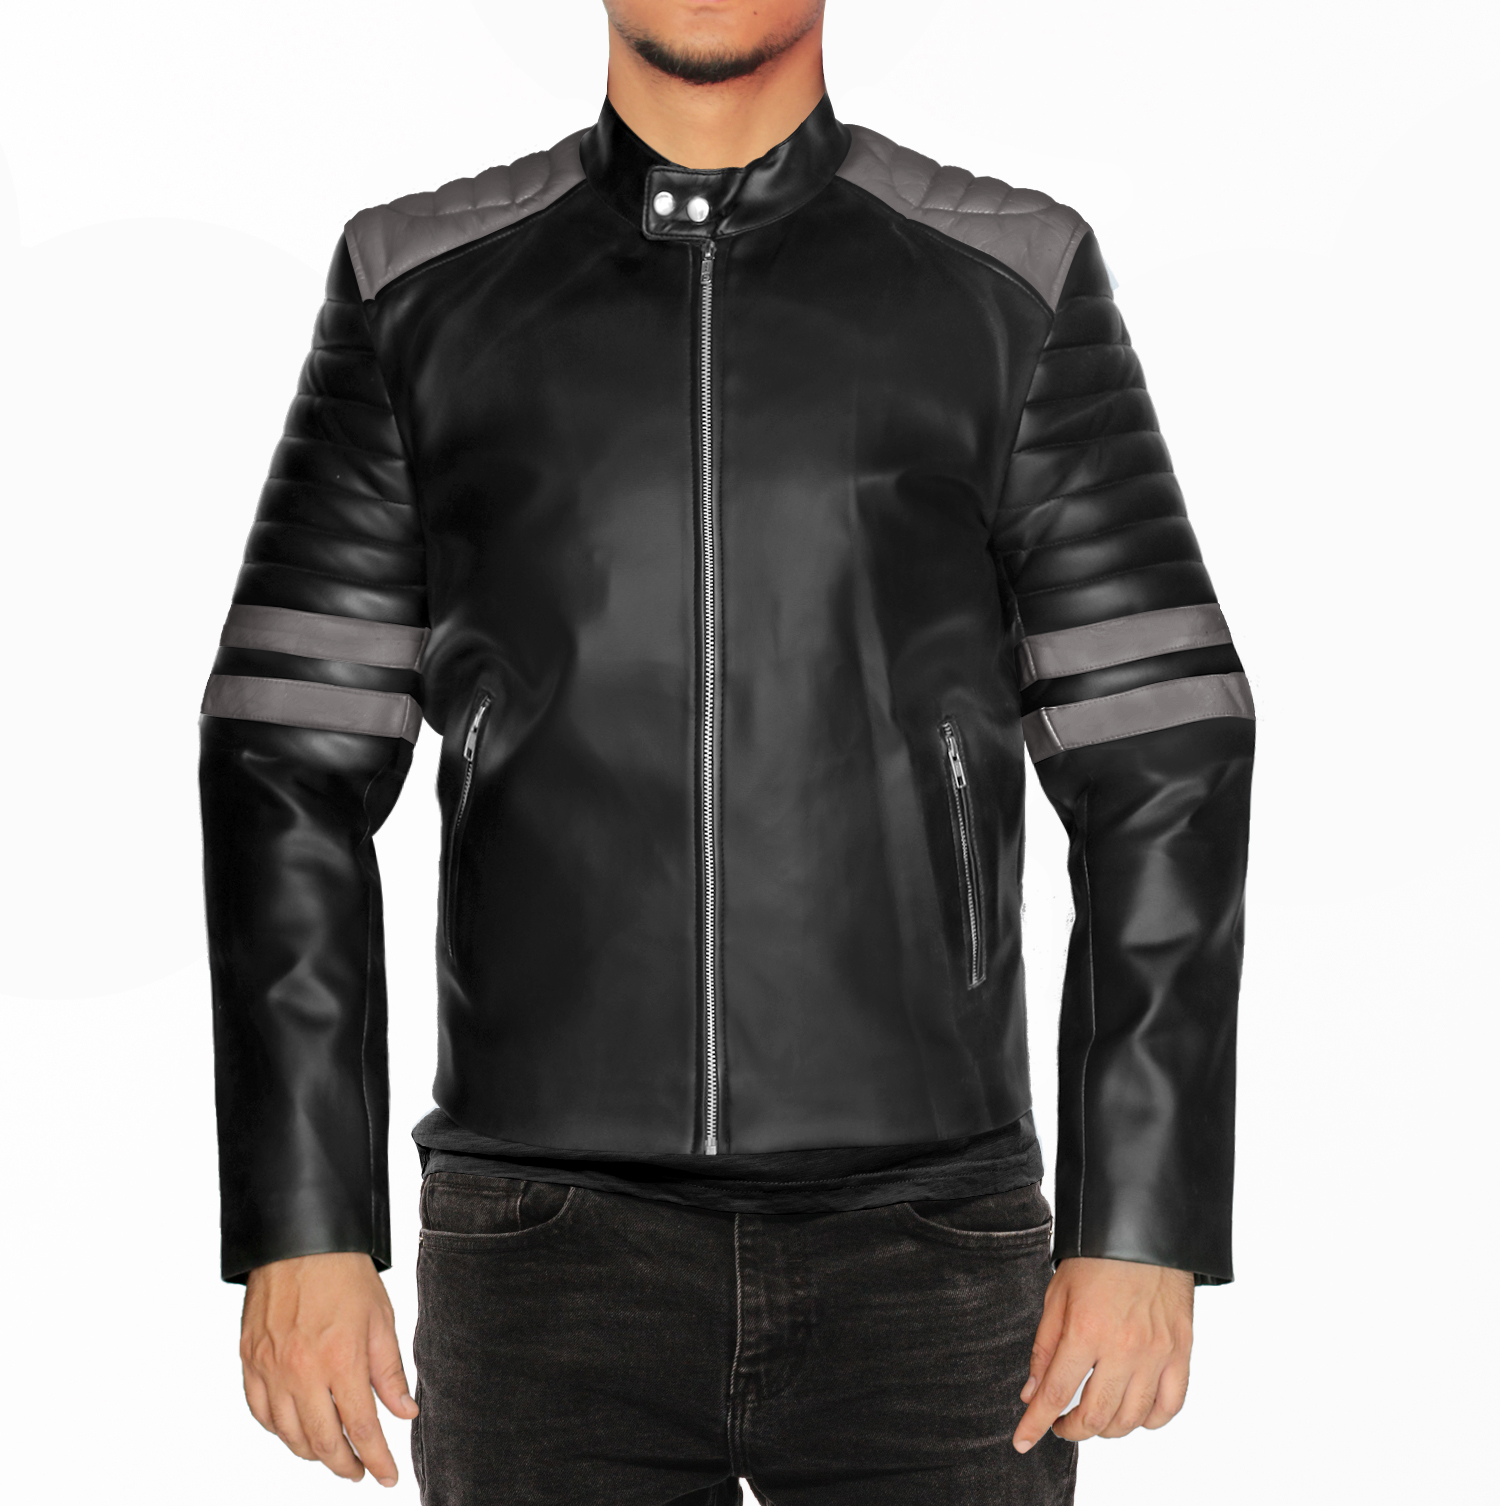 NomiLeather black leather jacket | mens leather jacket and genuine leather jacket men (Black With Grey Strip ) X-Small - image 1 of 7